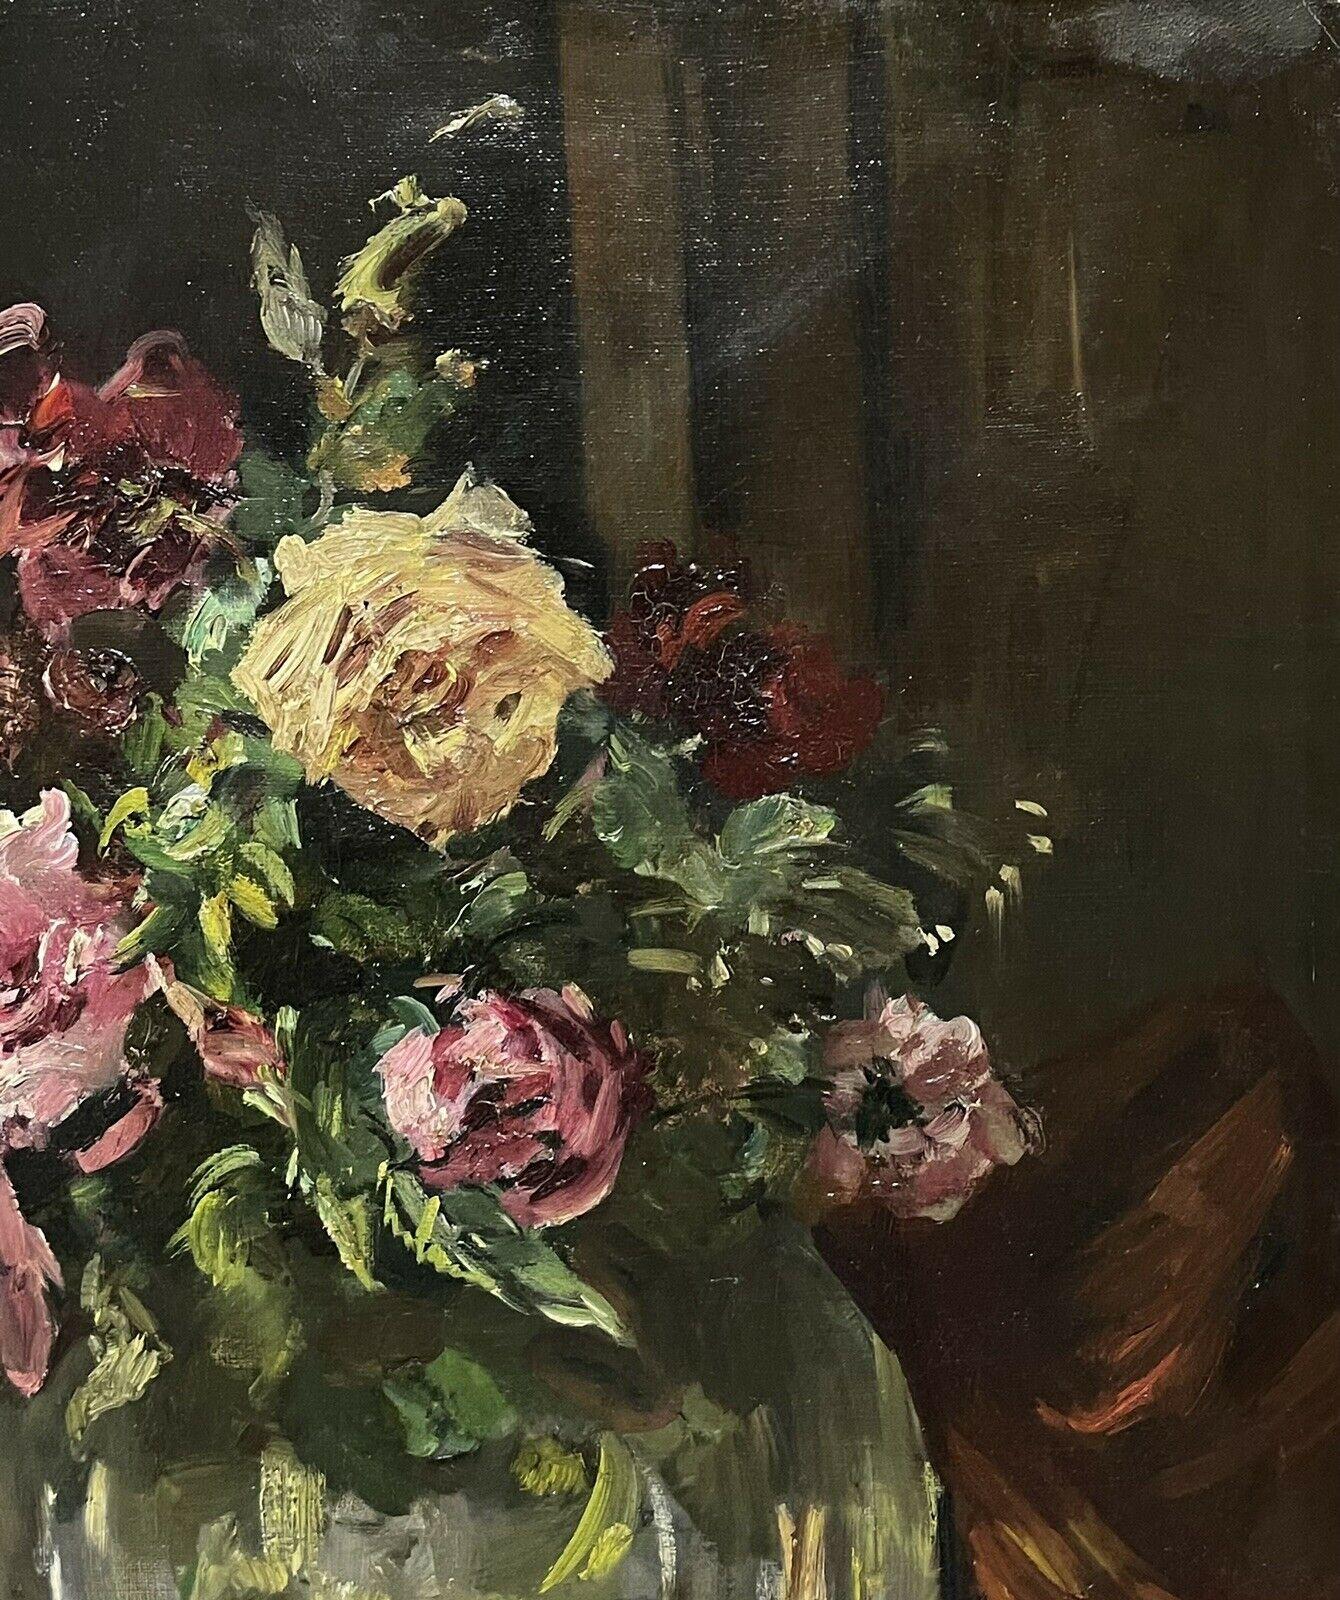 Artist/ School:
French School, mid 20th century, signed

Title:
still life of roses in glass bowl

Medium:
oil painting on canvas, unframed

Size: 
painting:  21 x 17.5 inches

Provenance:
private collection, France

Condition:
The painting is in